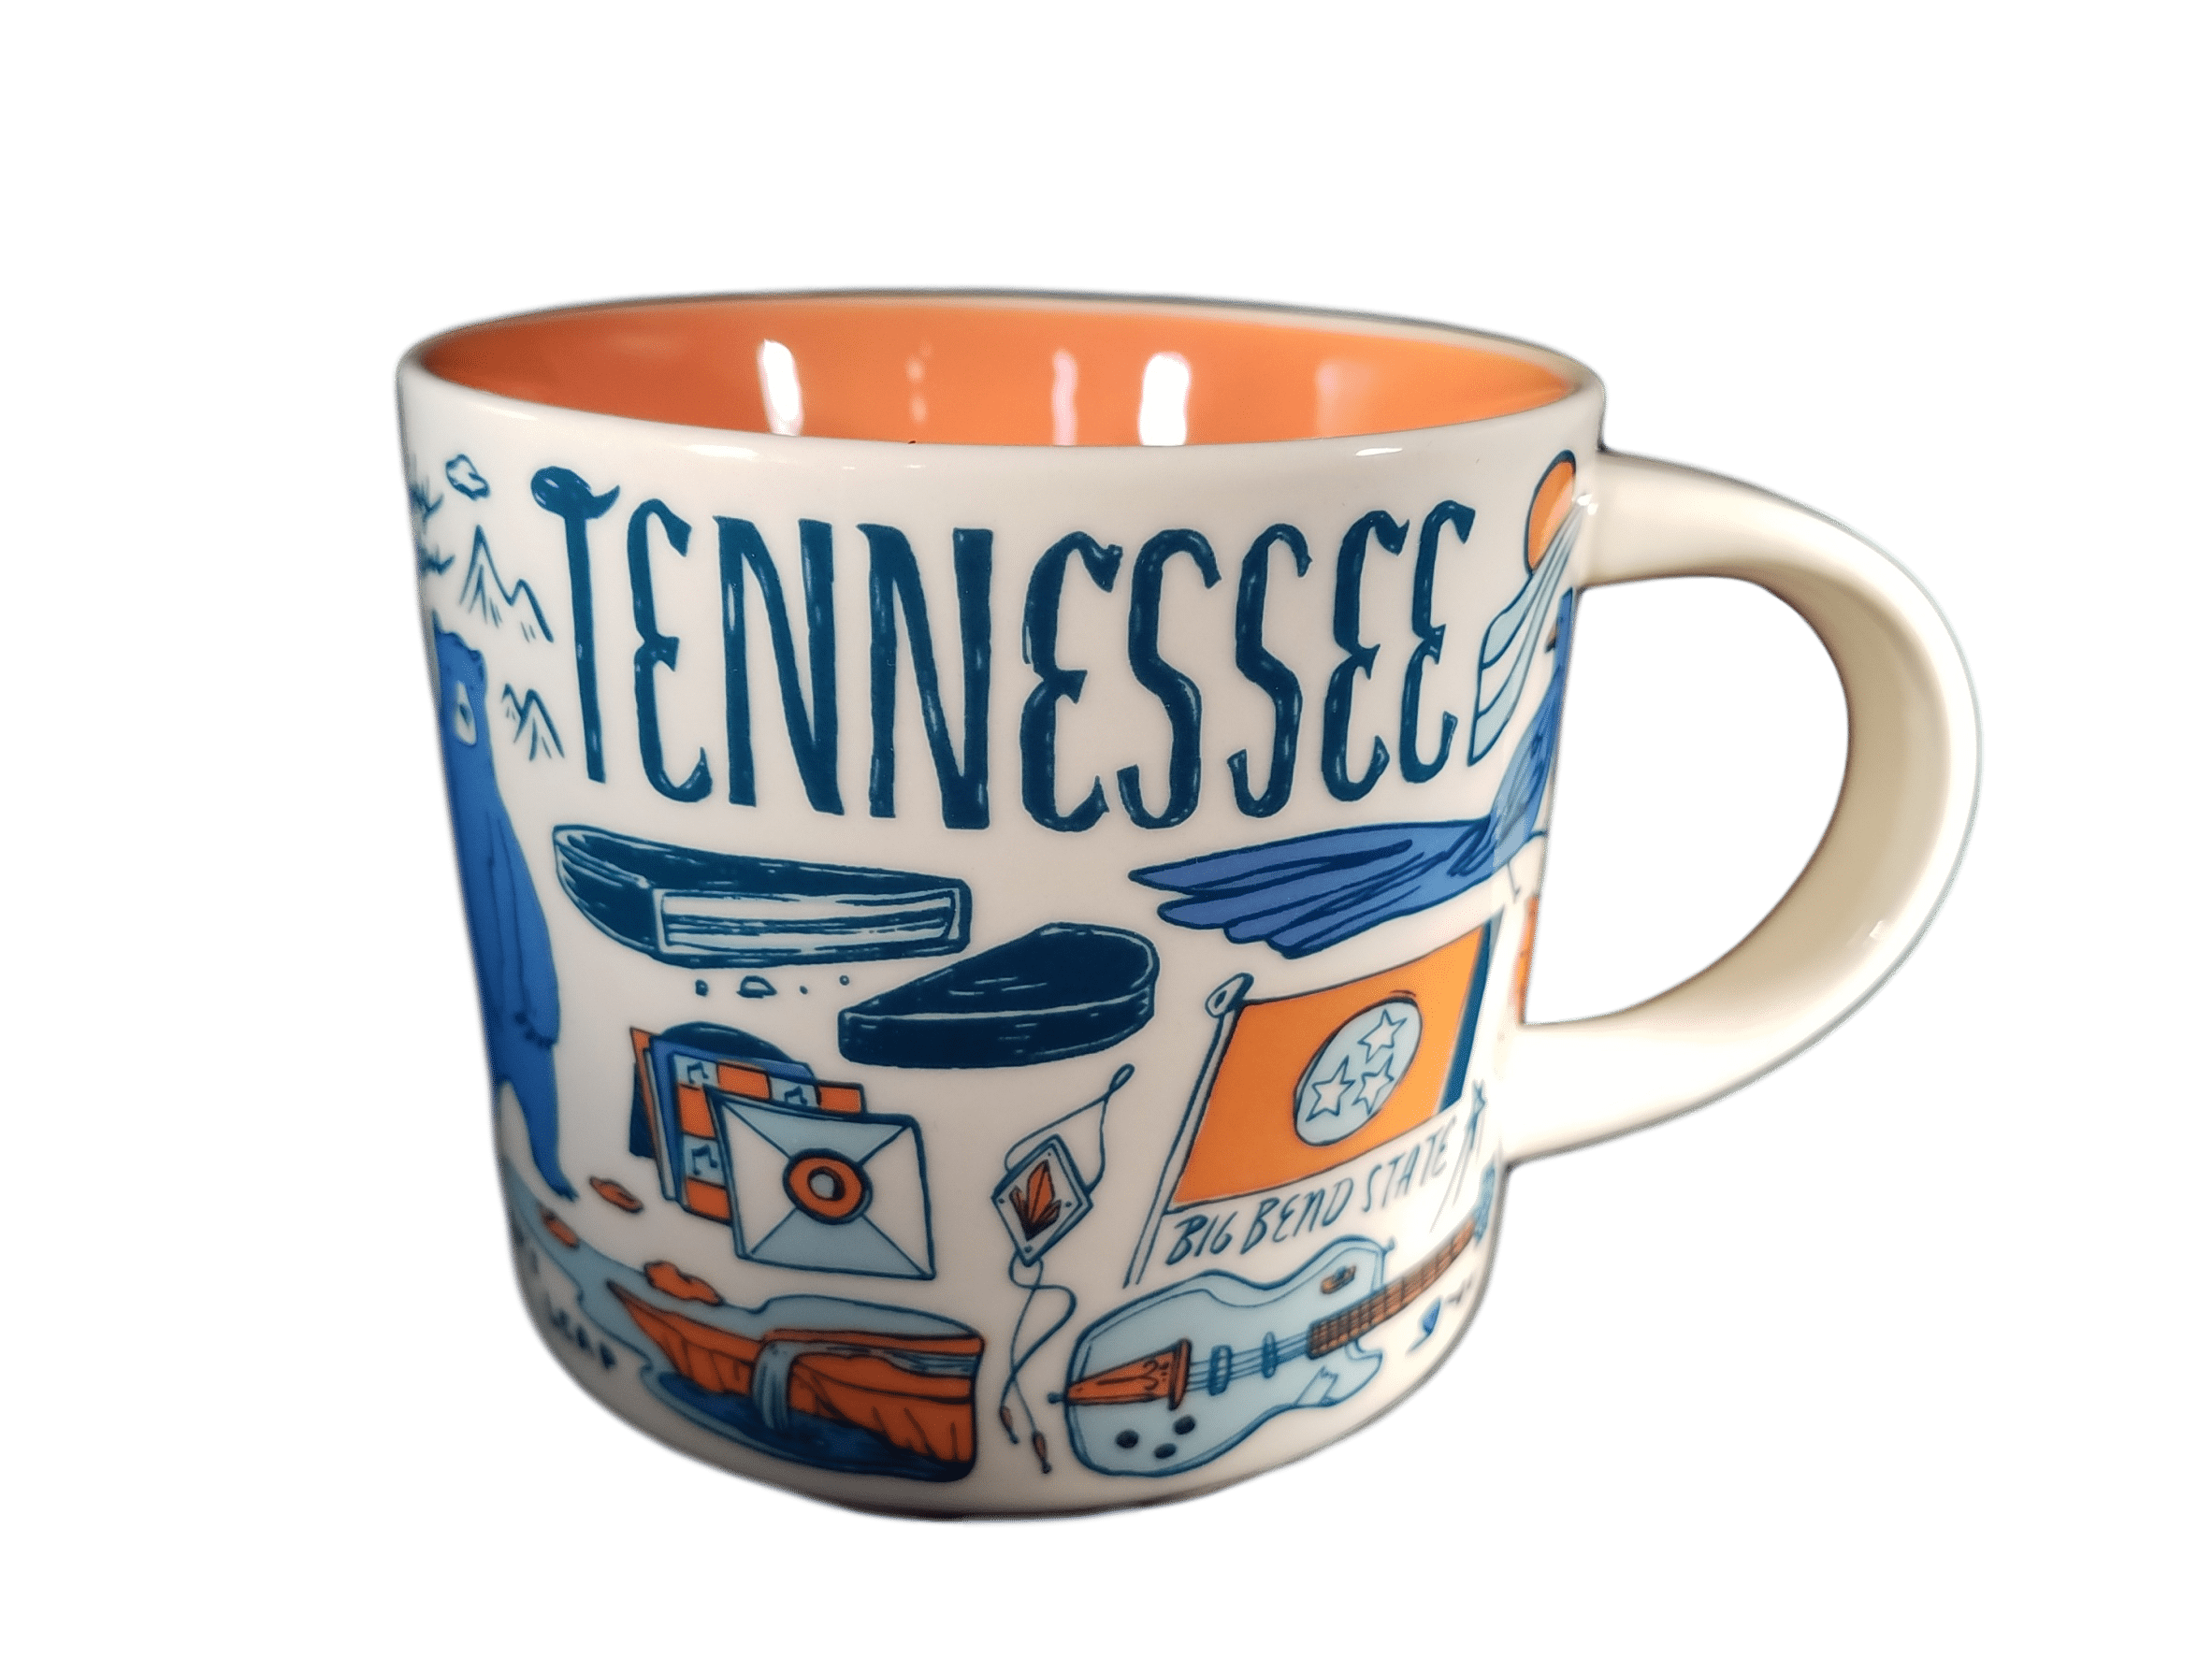 Starbucks Nashville and Tennessee Been There Series Ceramic Coffee